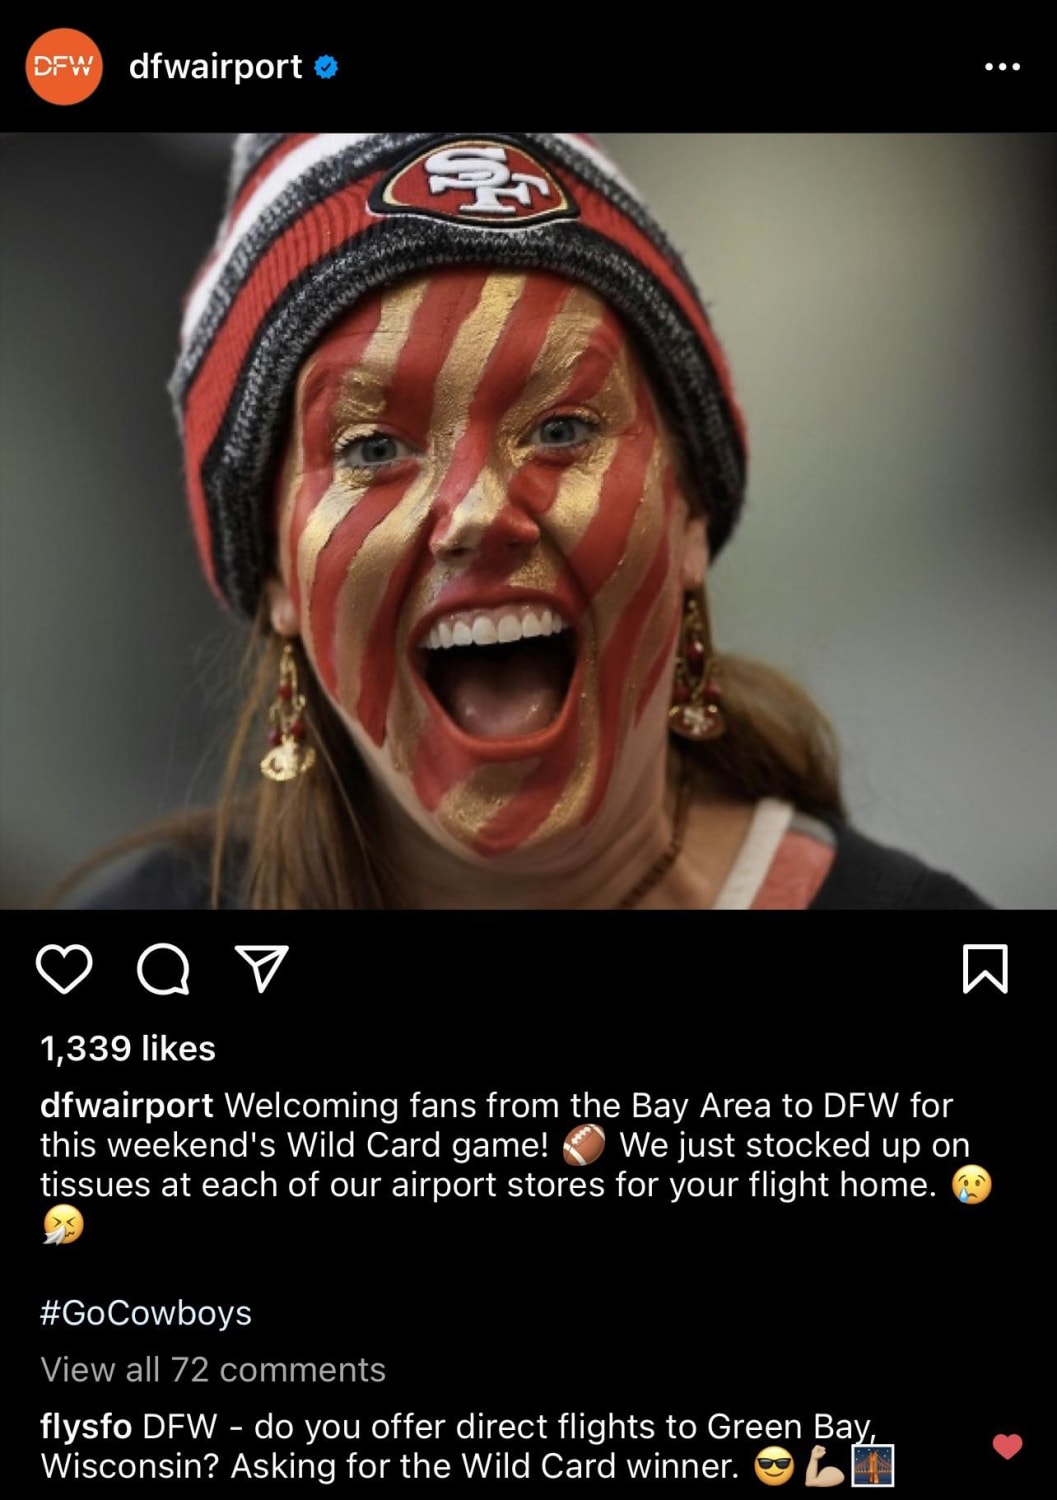 SFO’s IG making Dallas/Ft. Worth airport eat their own words in the comments